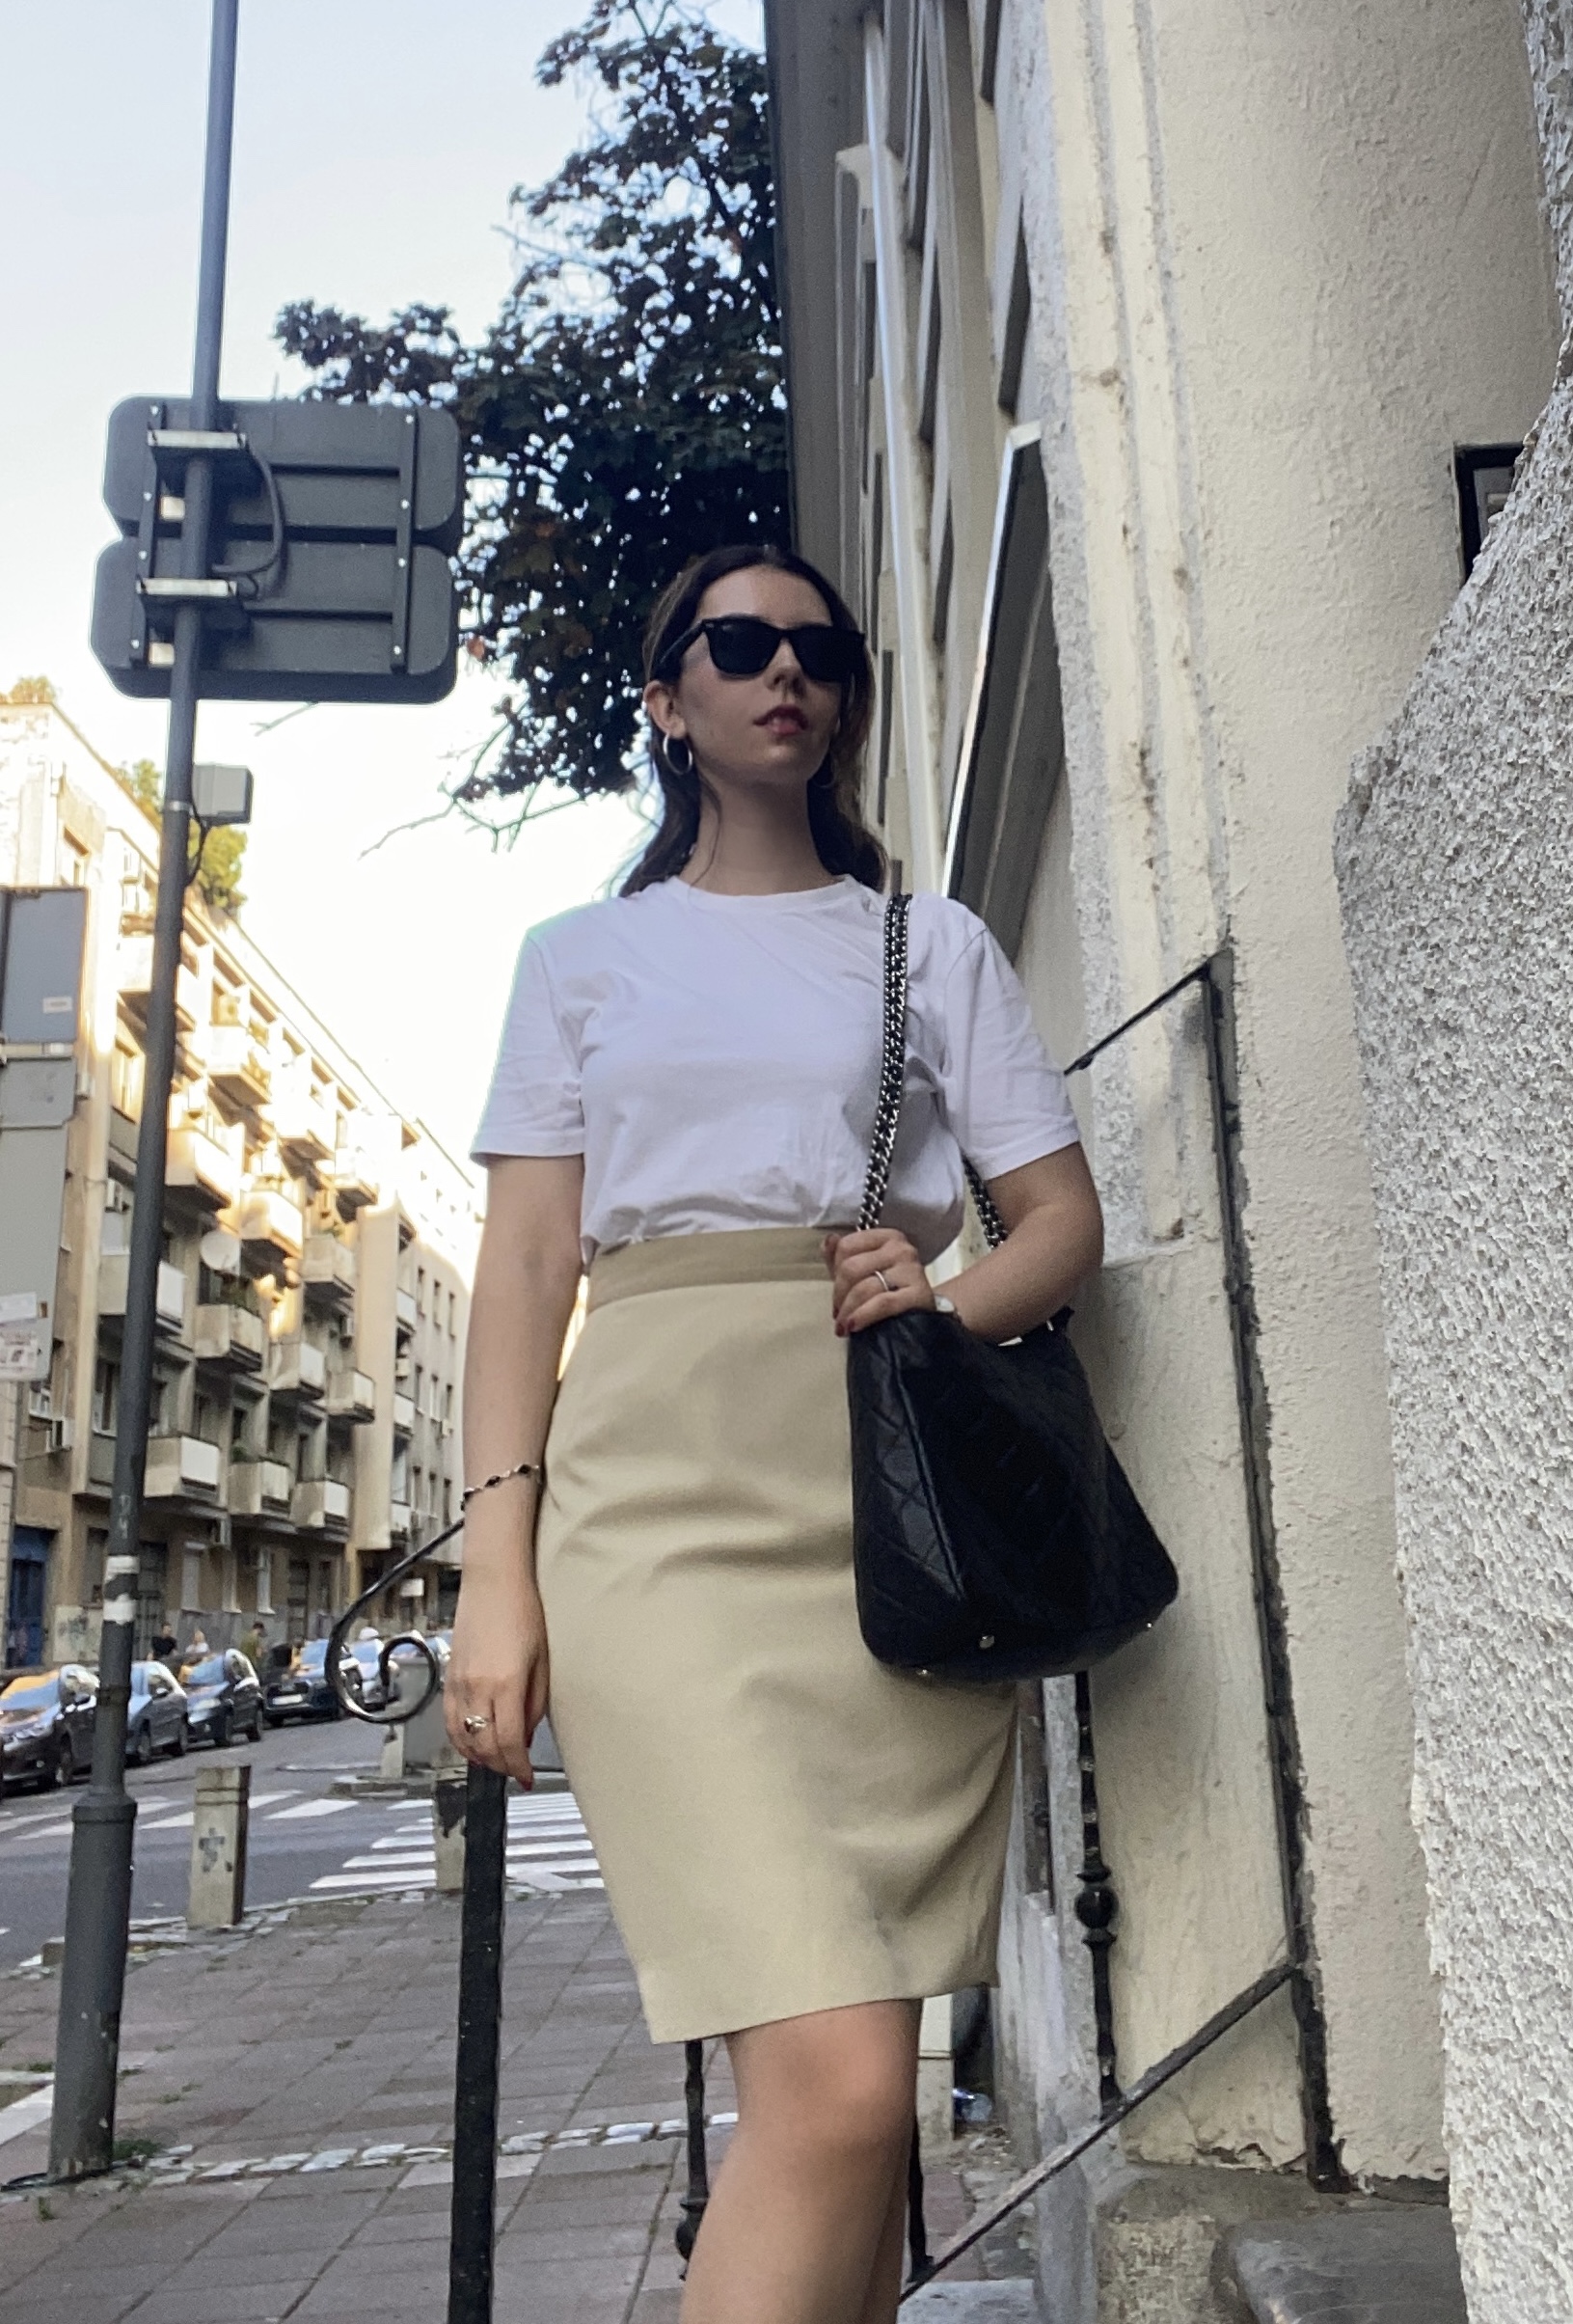 Tight Green Pencil Skirt White Top Wide Black Belt With Gold Metal Buckle  and Leopard Print High Heels | Fashion, Girl street fashion, Girl fashion